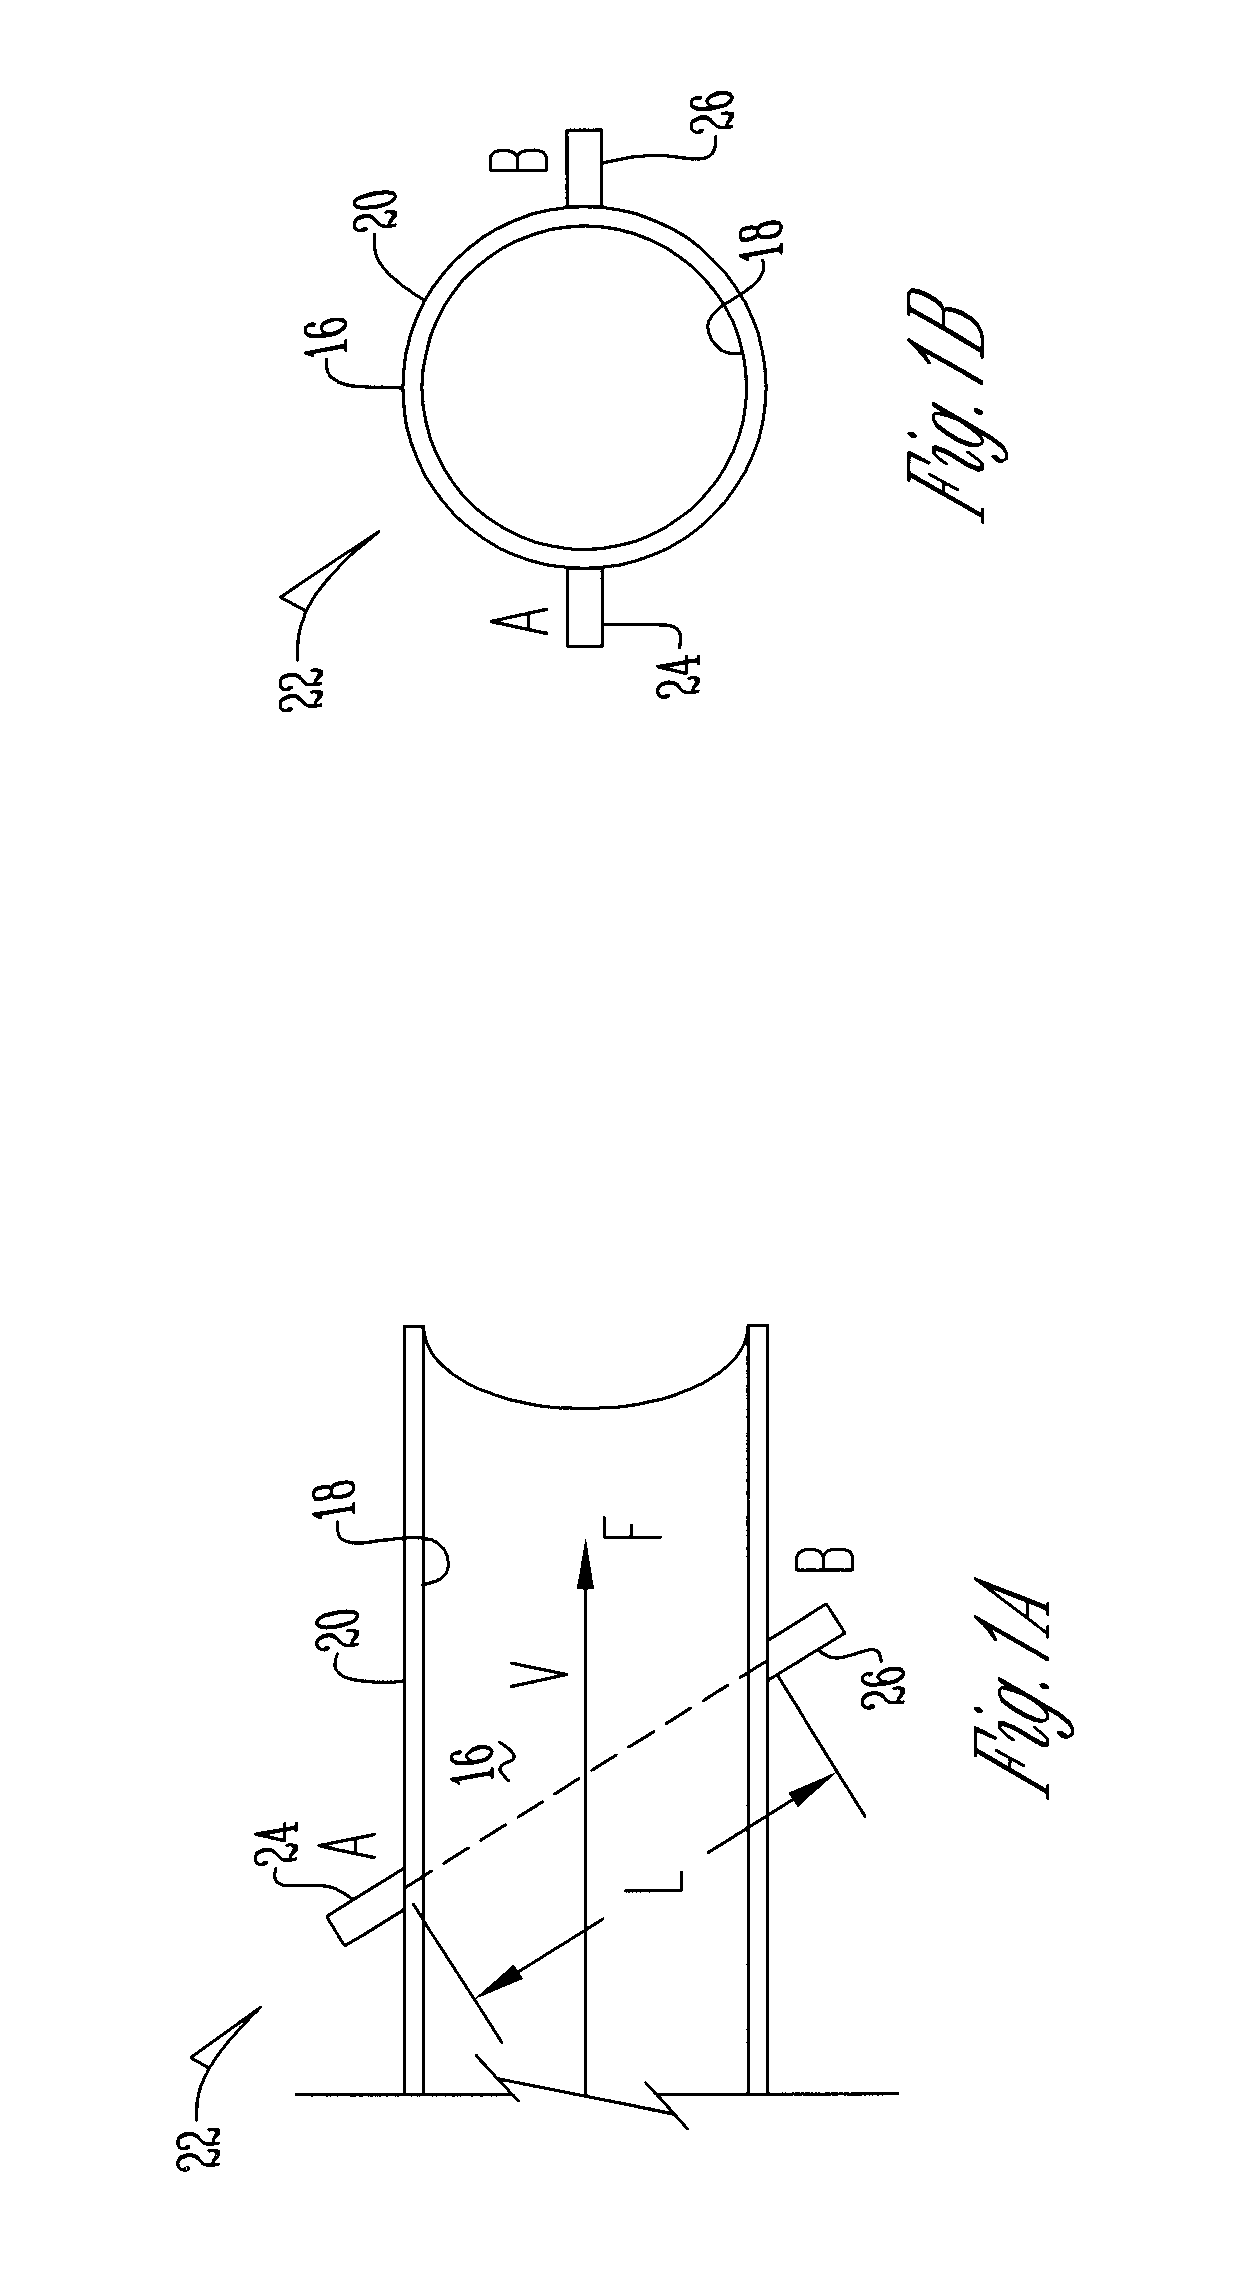 Method of varying the flow rate of fluid from a medical pump and hybrid sensor system performing the same